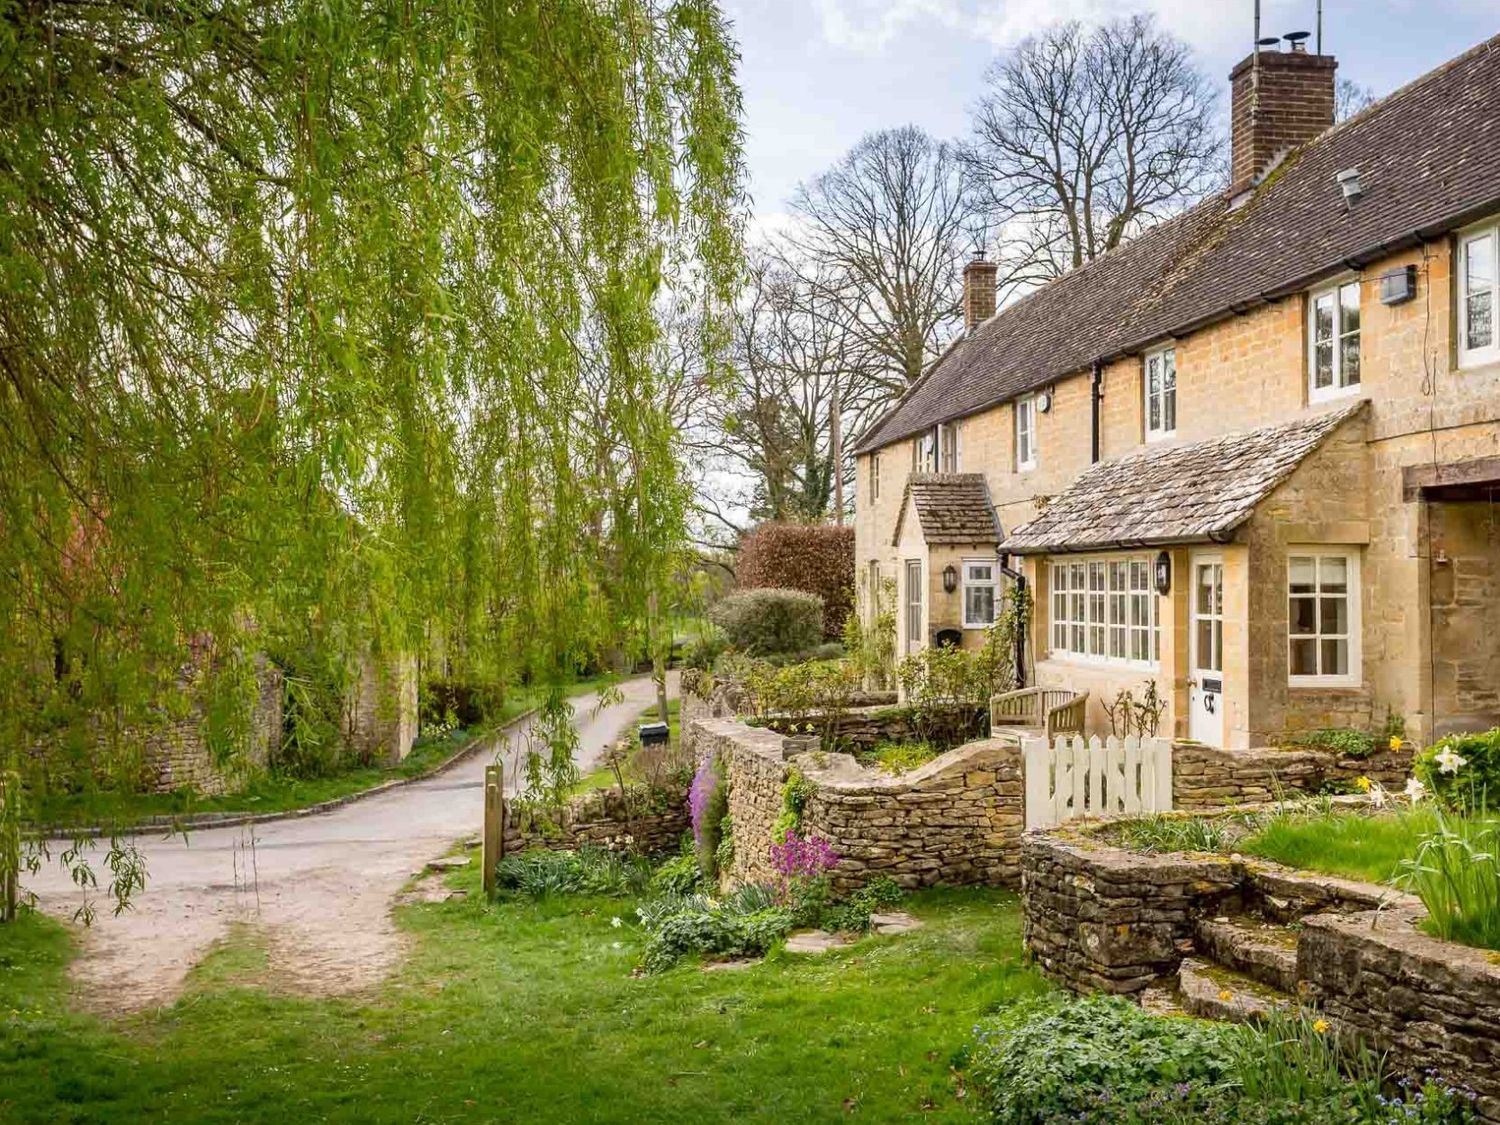 Willow Cottage - Cotswolds - 1091264 - photo 1